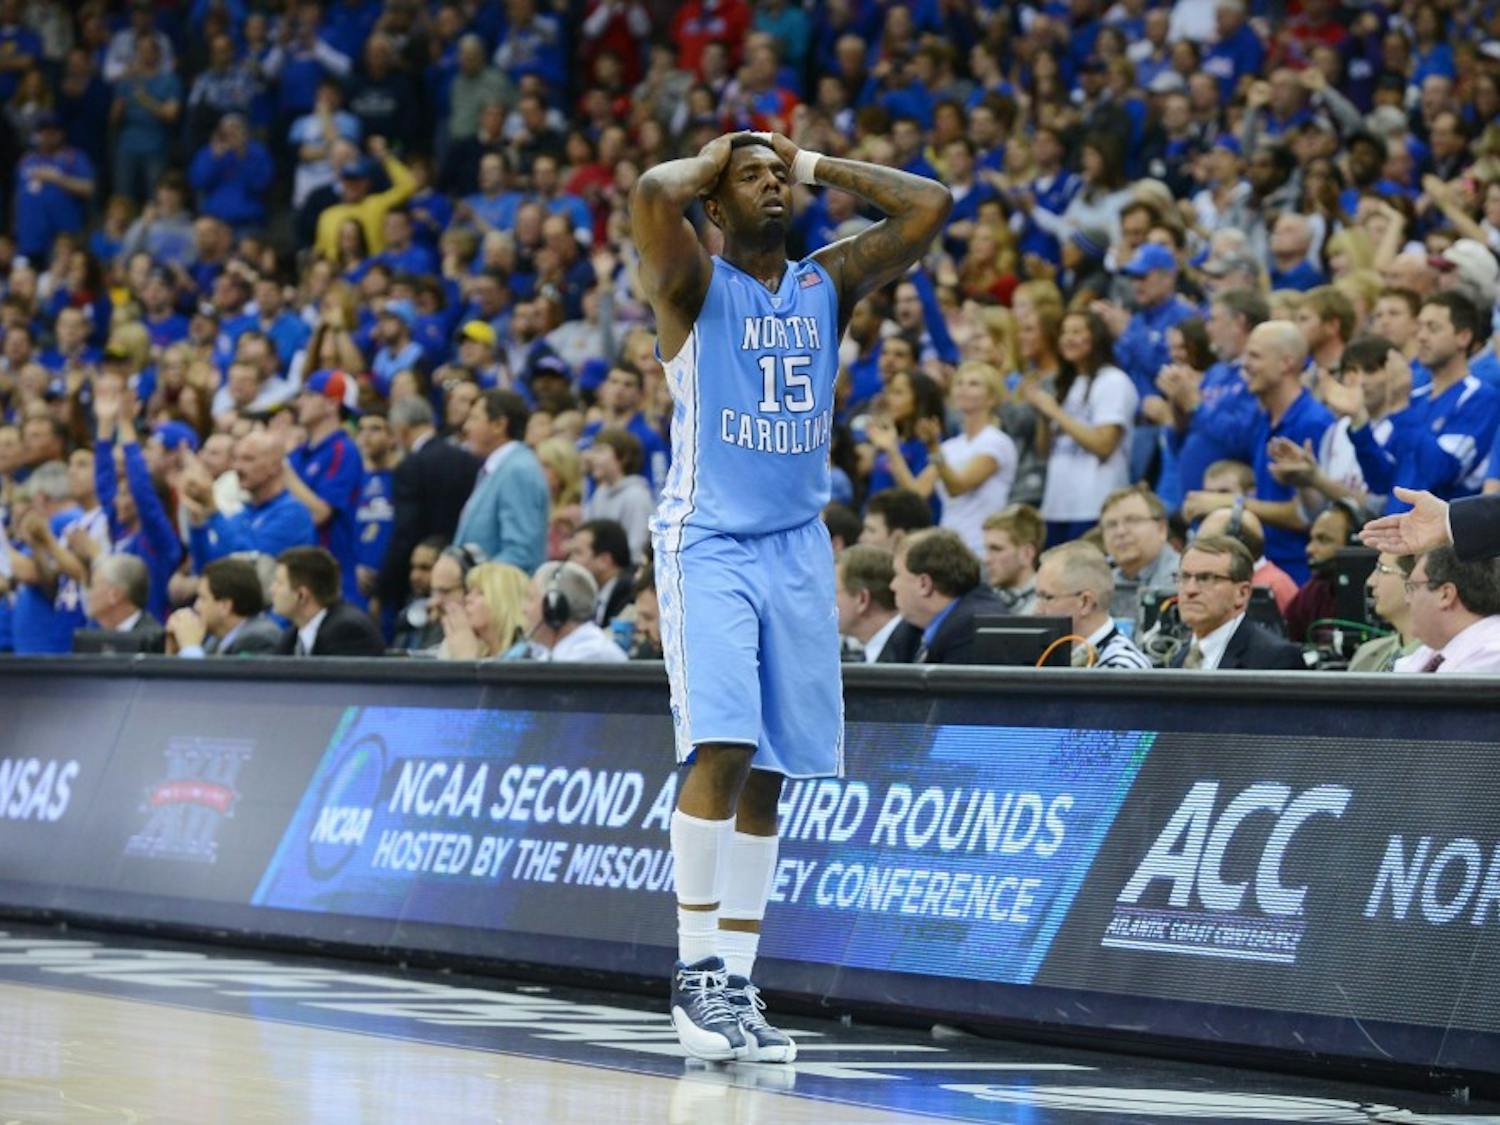 P.J. Hairston (15) reacts after being takes out of the game late in the second half.